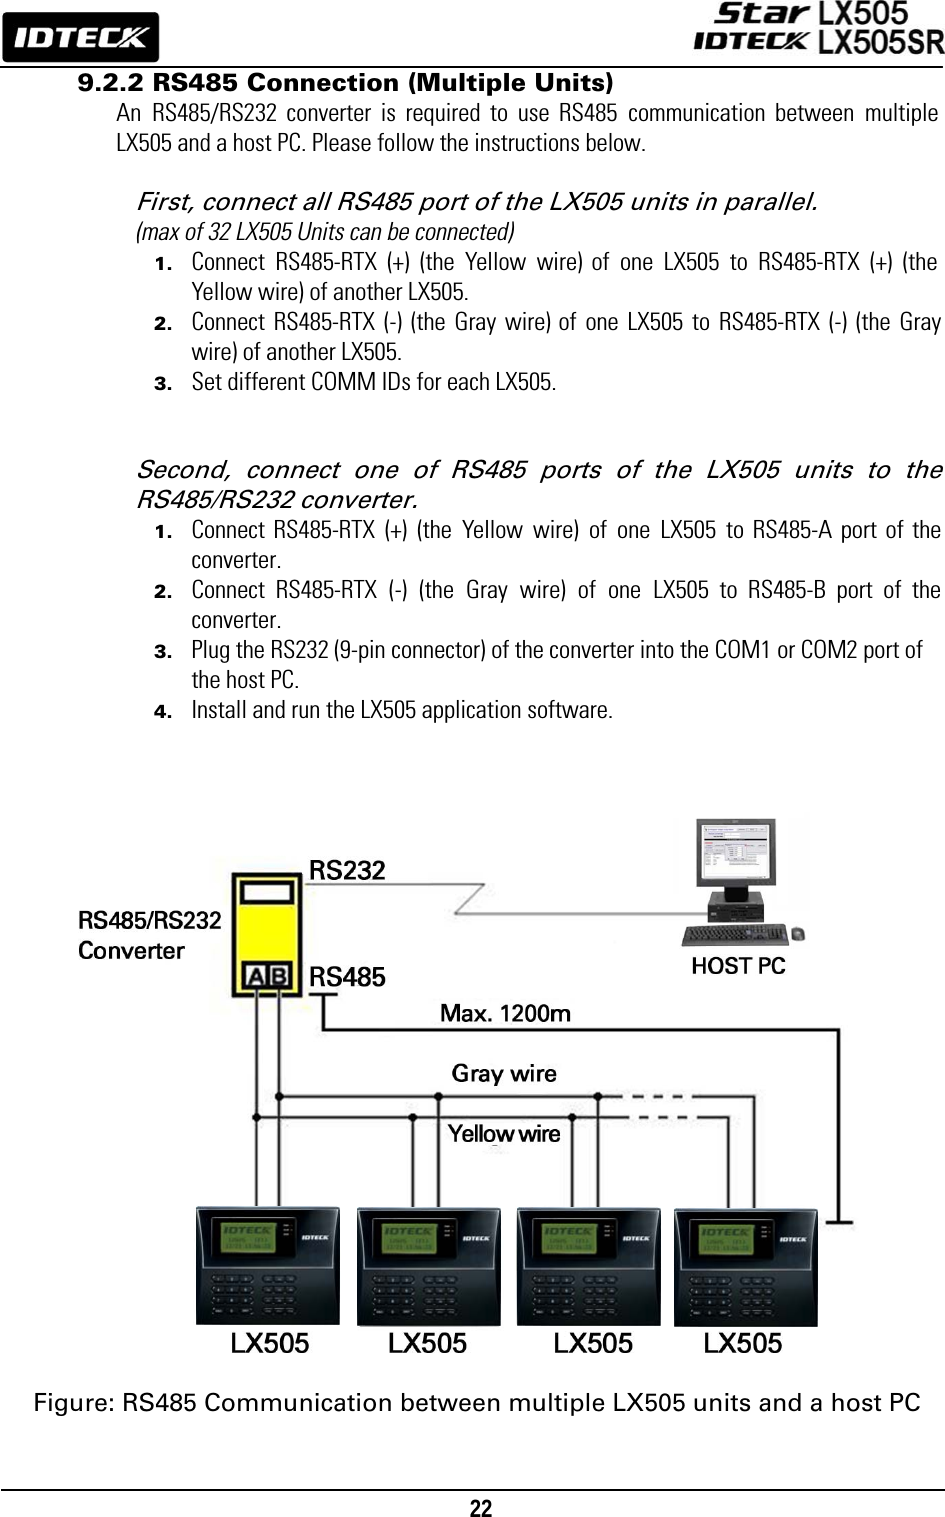                                                                                    22      9.2.2 RS485 Connection (Multiple Units) An RS485/RS232 converter is required to use RS485 communication between multiple LX505 and a host PC. Please follow the instructions below.  First, connect all RS485 port of the LX505 units in parallel.   (max of 32 LX505 Units can be connected) 1. Connect RS485-RTX (+) (the Yellow wire) of one LX505 to RS485-RTX (+) (the Yellow wire) of another LX505. 2. Connect RS485-RTX (-) (the Gray wire) of one LX505 to RS485-RTX (-) (the Gray wire) of another LX505. 3. Set different COMM IDs for each LX505.   Second, connect one of RS485 ports of the LX505 units to the RS485/RS232 converter. 1. Connect RS485-RTX (+) (the Yellow wire) of one LX505 to RS485-A port of the converter. 2. Connect RS485-RTX (-) (the Gray wire) of one LX505 to RS485-B port of the converter. 3. Plug the RS232 (9-pin connector) of the converter into the COM1 or COM2 port of the host PC. 4. Install and run the LX505 application software.                        Figure: RS485 Communication between multiple LX505 units and a host PC  